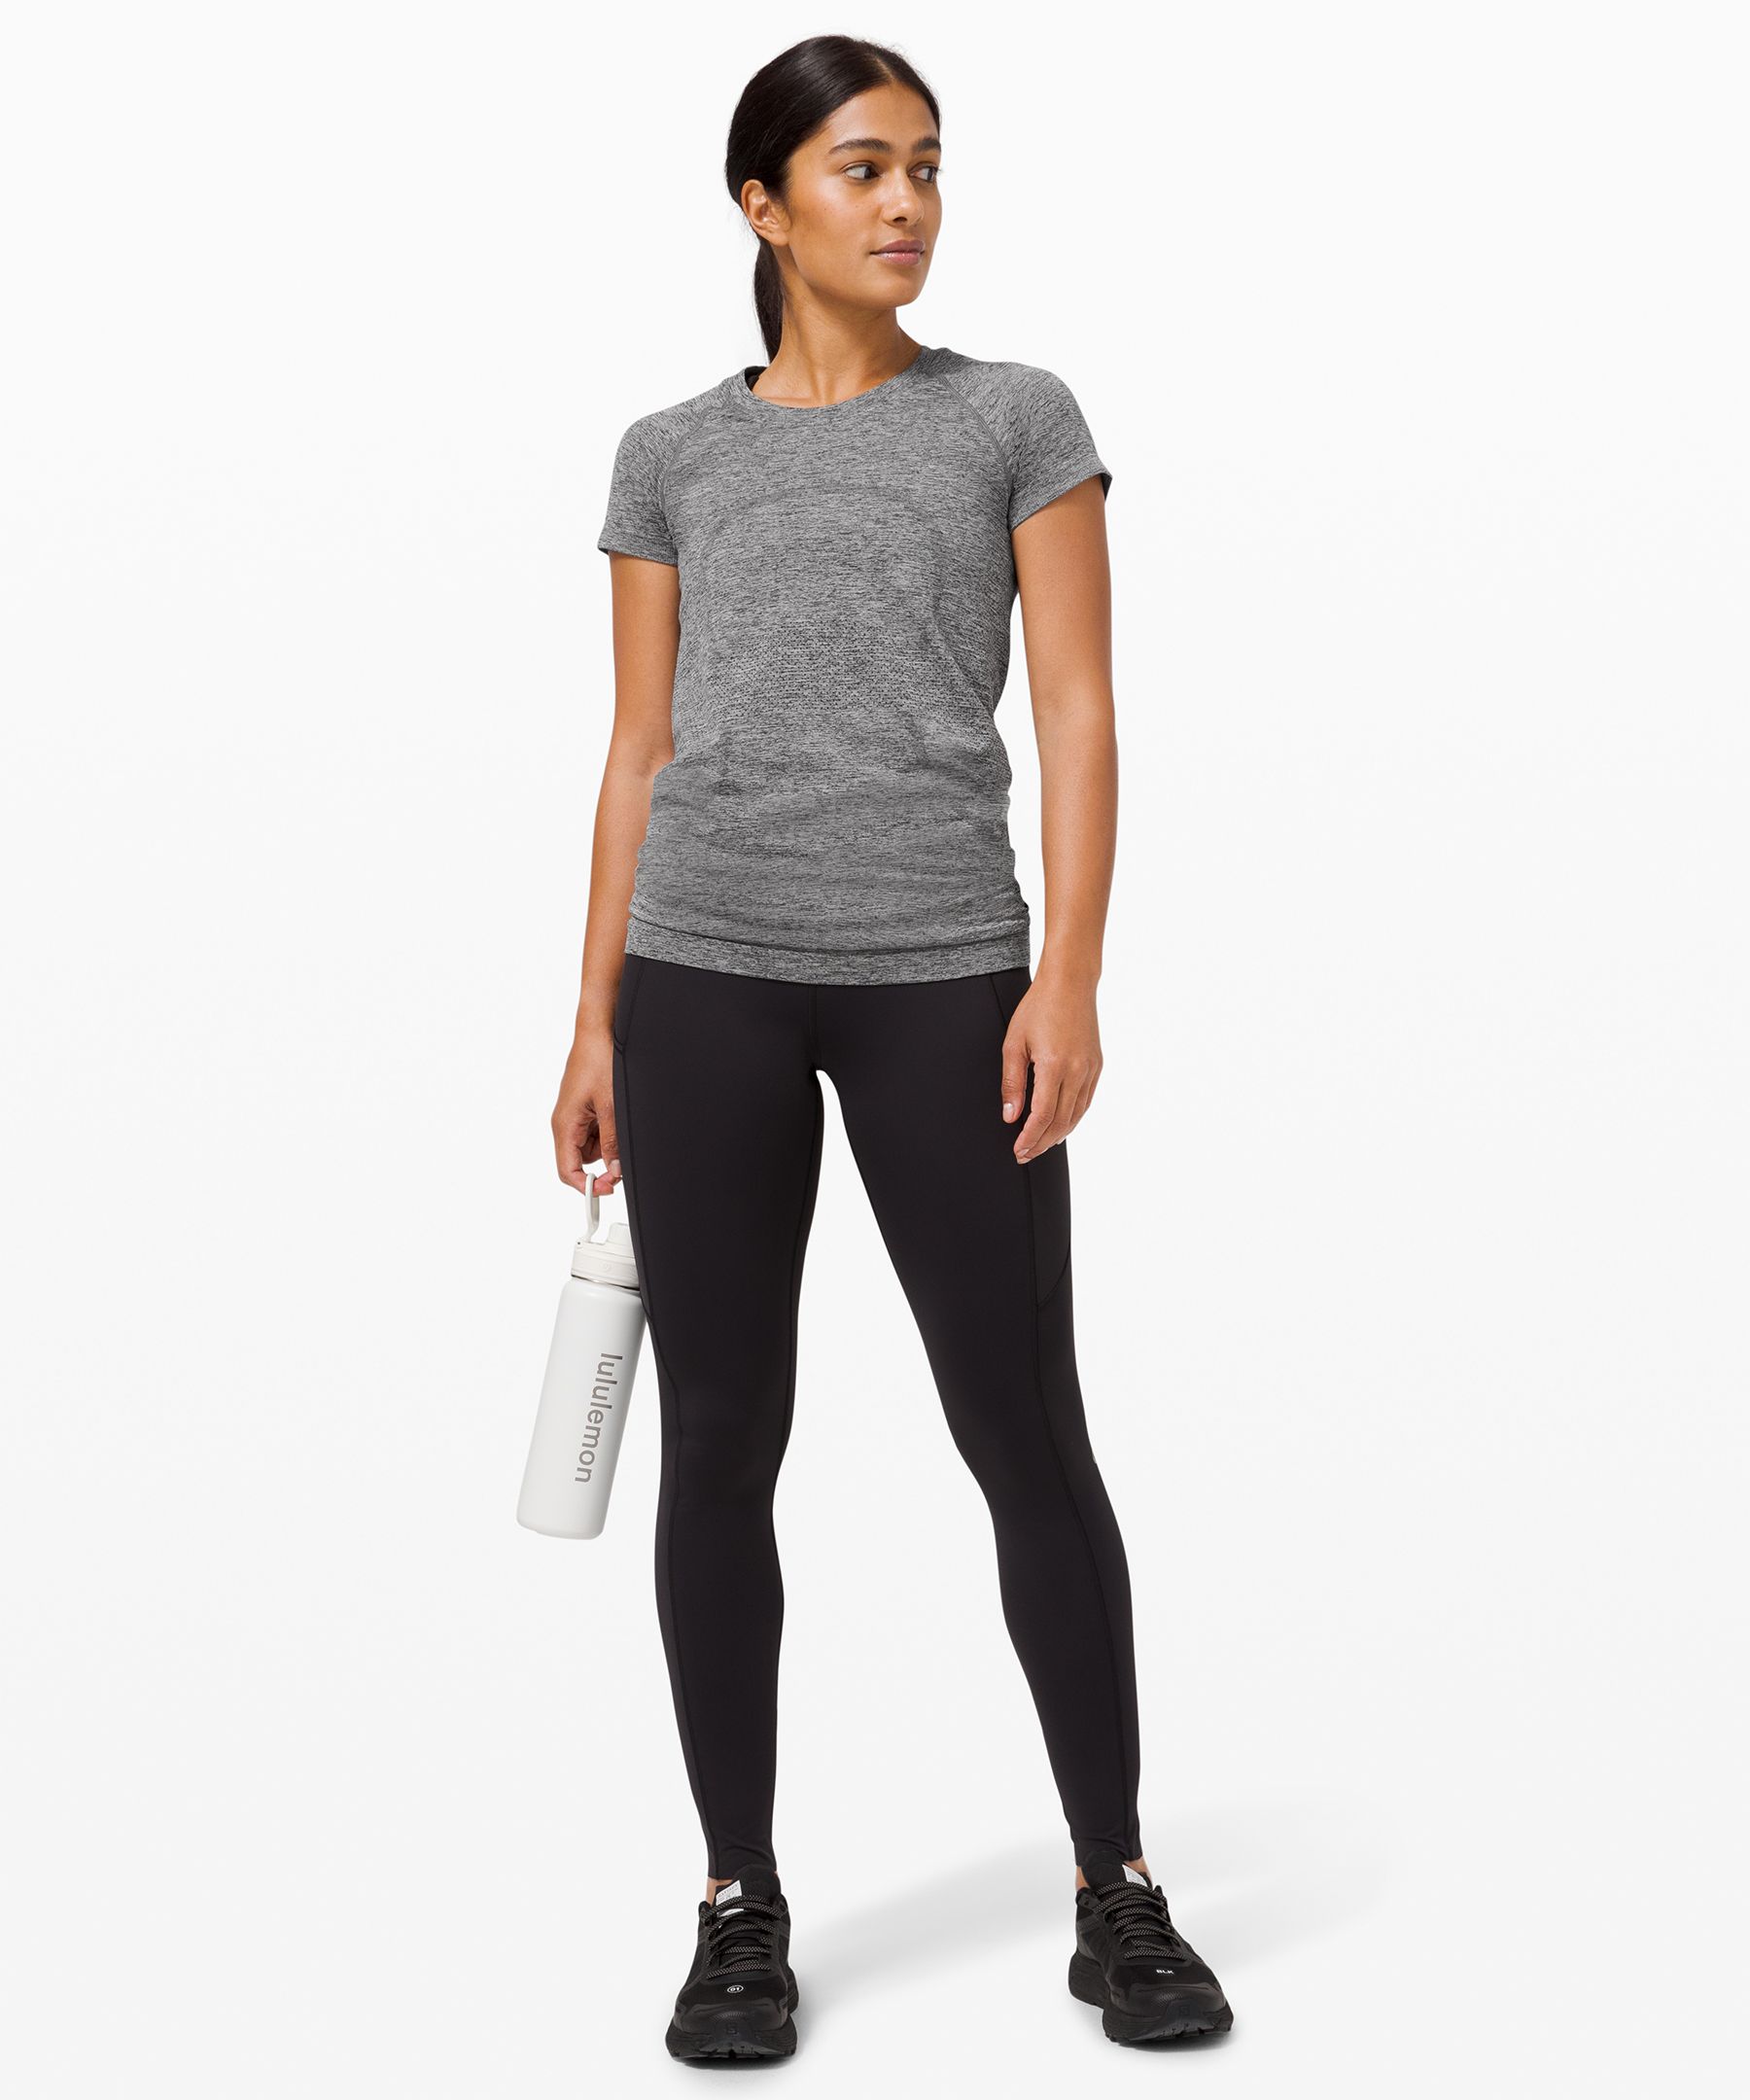 In Stores: Meshed Up Tank and Tights + City Trek Trousers + Girlfriend Tee  - Agent Athletica